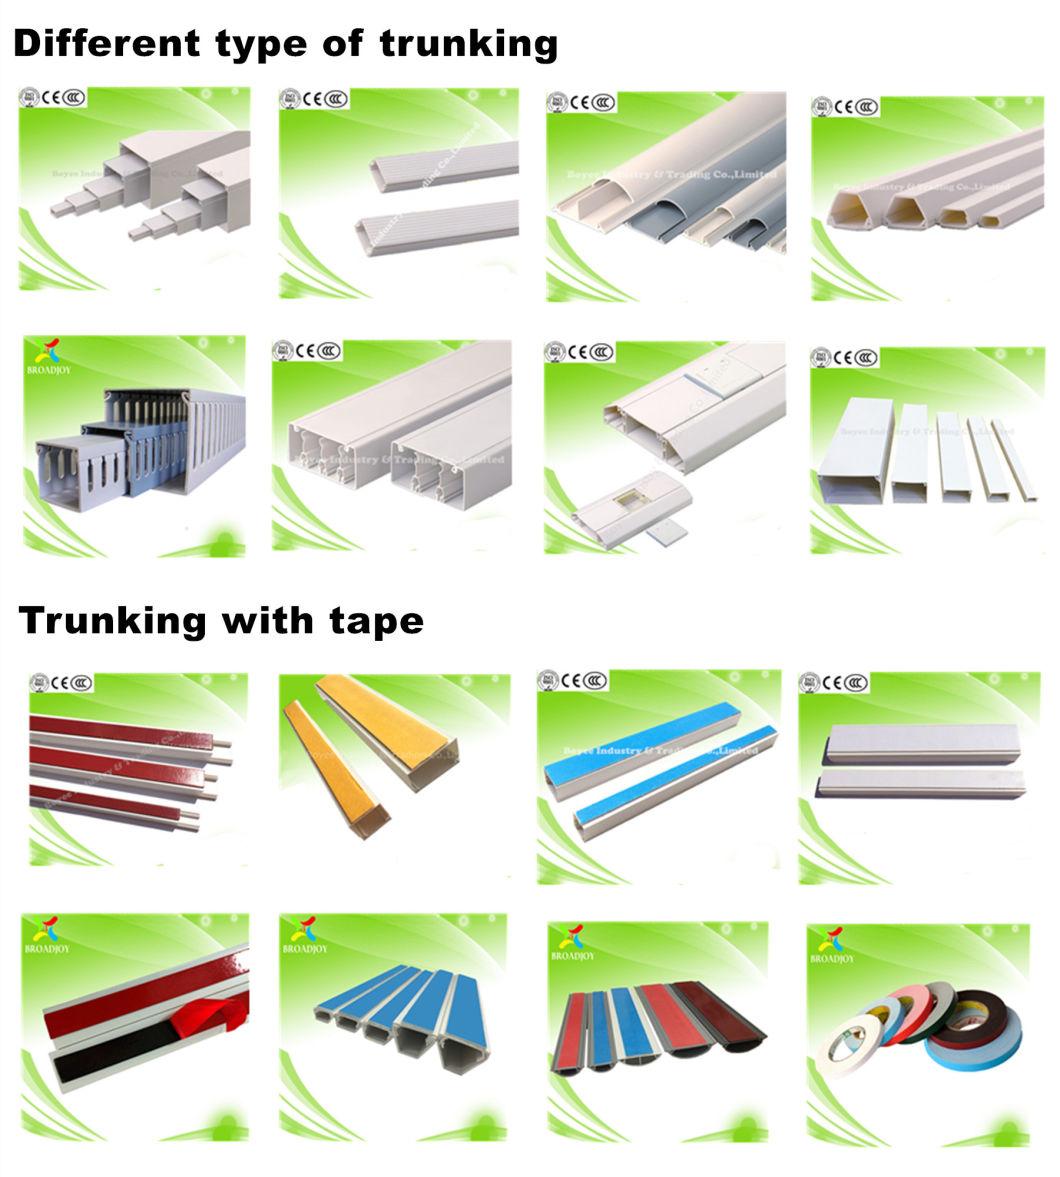 PVC Trunking with Sticker/PVC Plastic Wire Compartment Floor Sticker Trunking Half Round Casing with Sticker